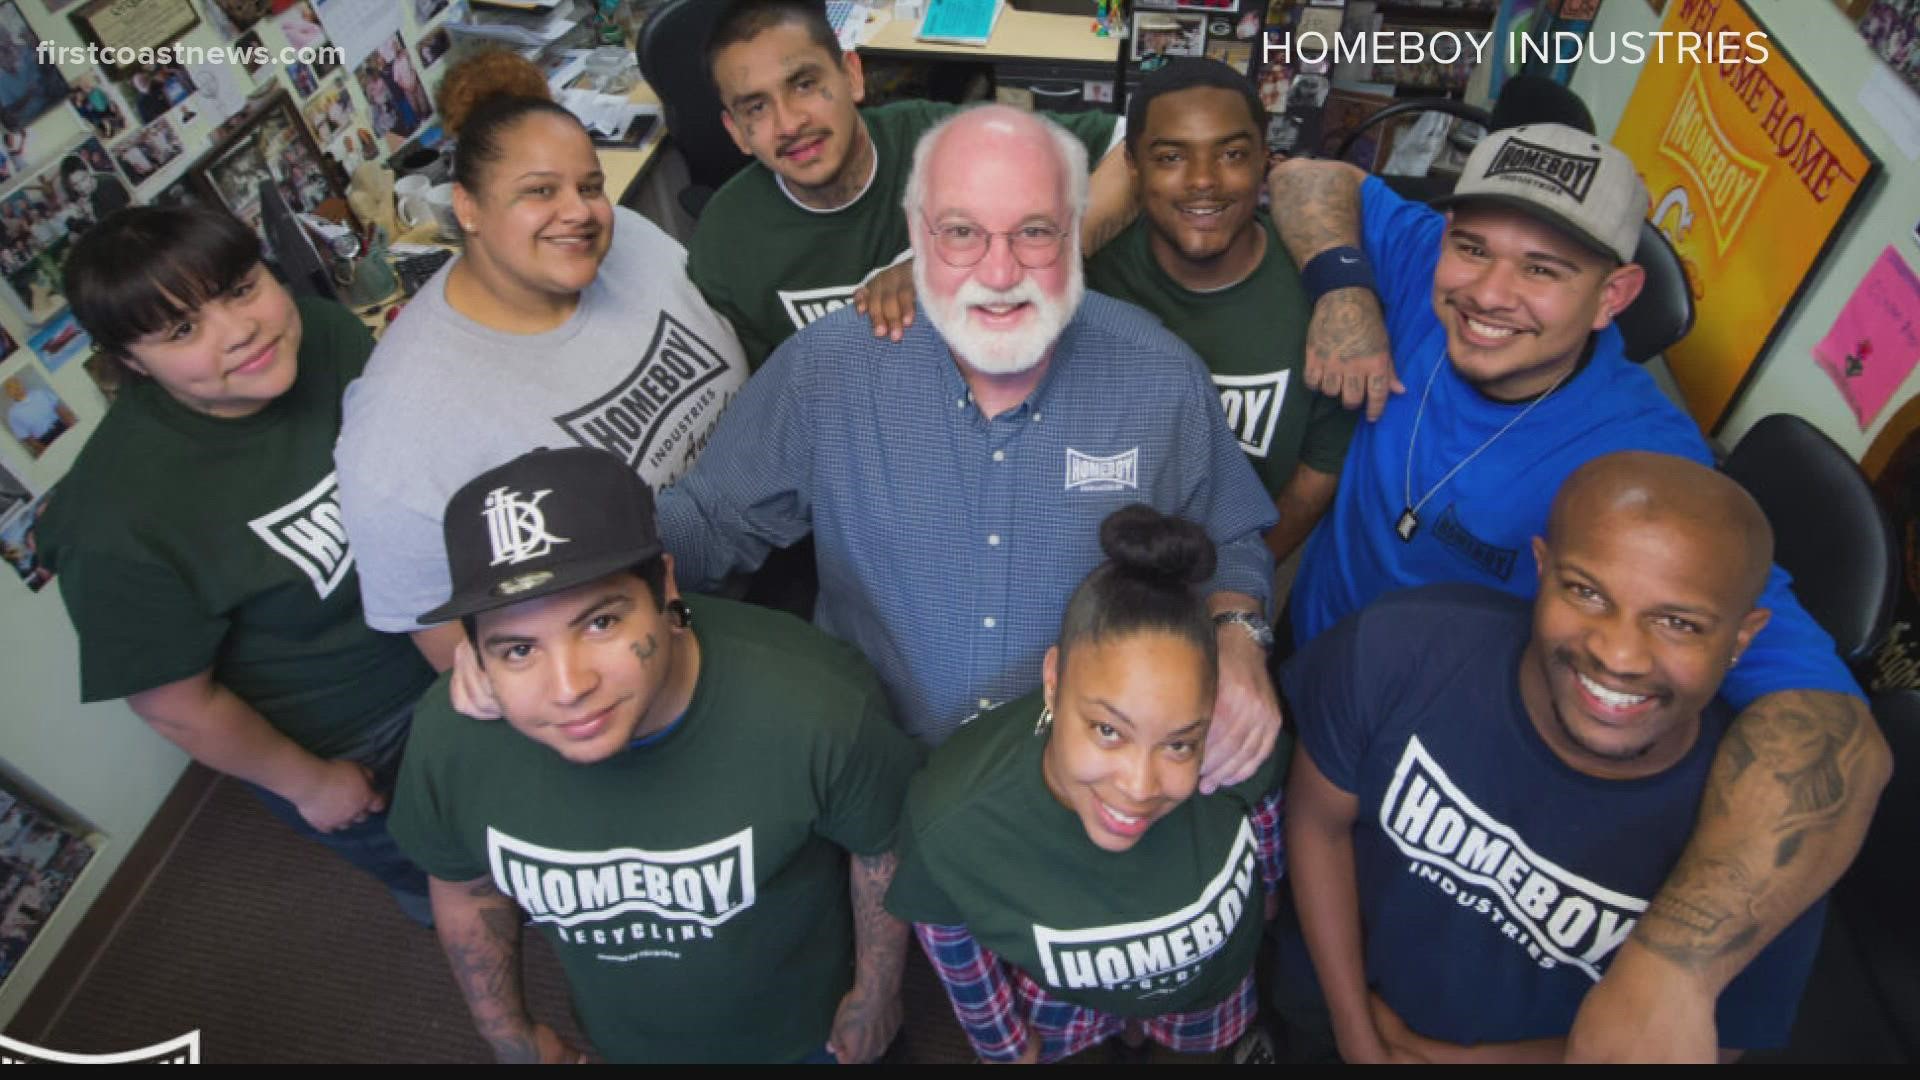 Father Greg Boyle started the world's largest gang intervention and rehab program in the world, Homeboy Industries, in Los Angeles, in the 1980's.